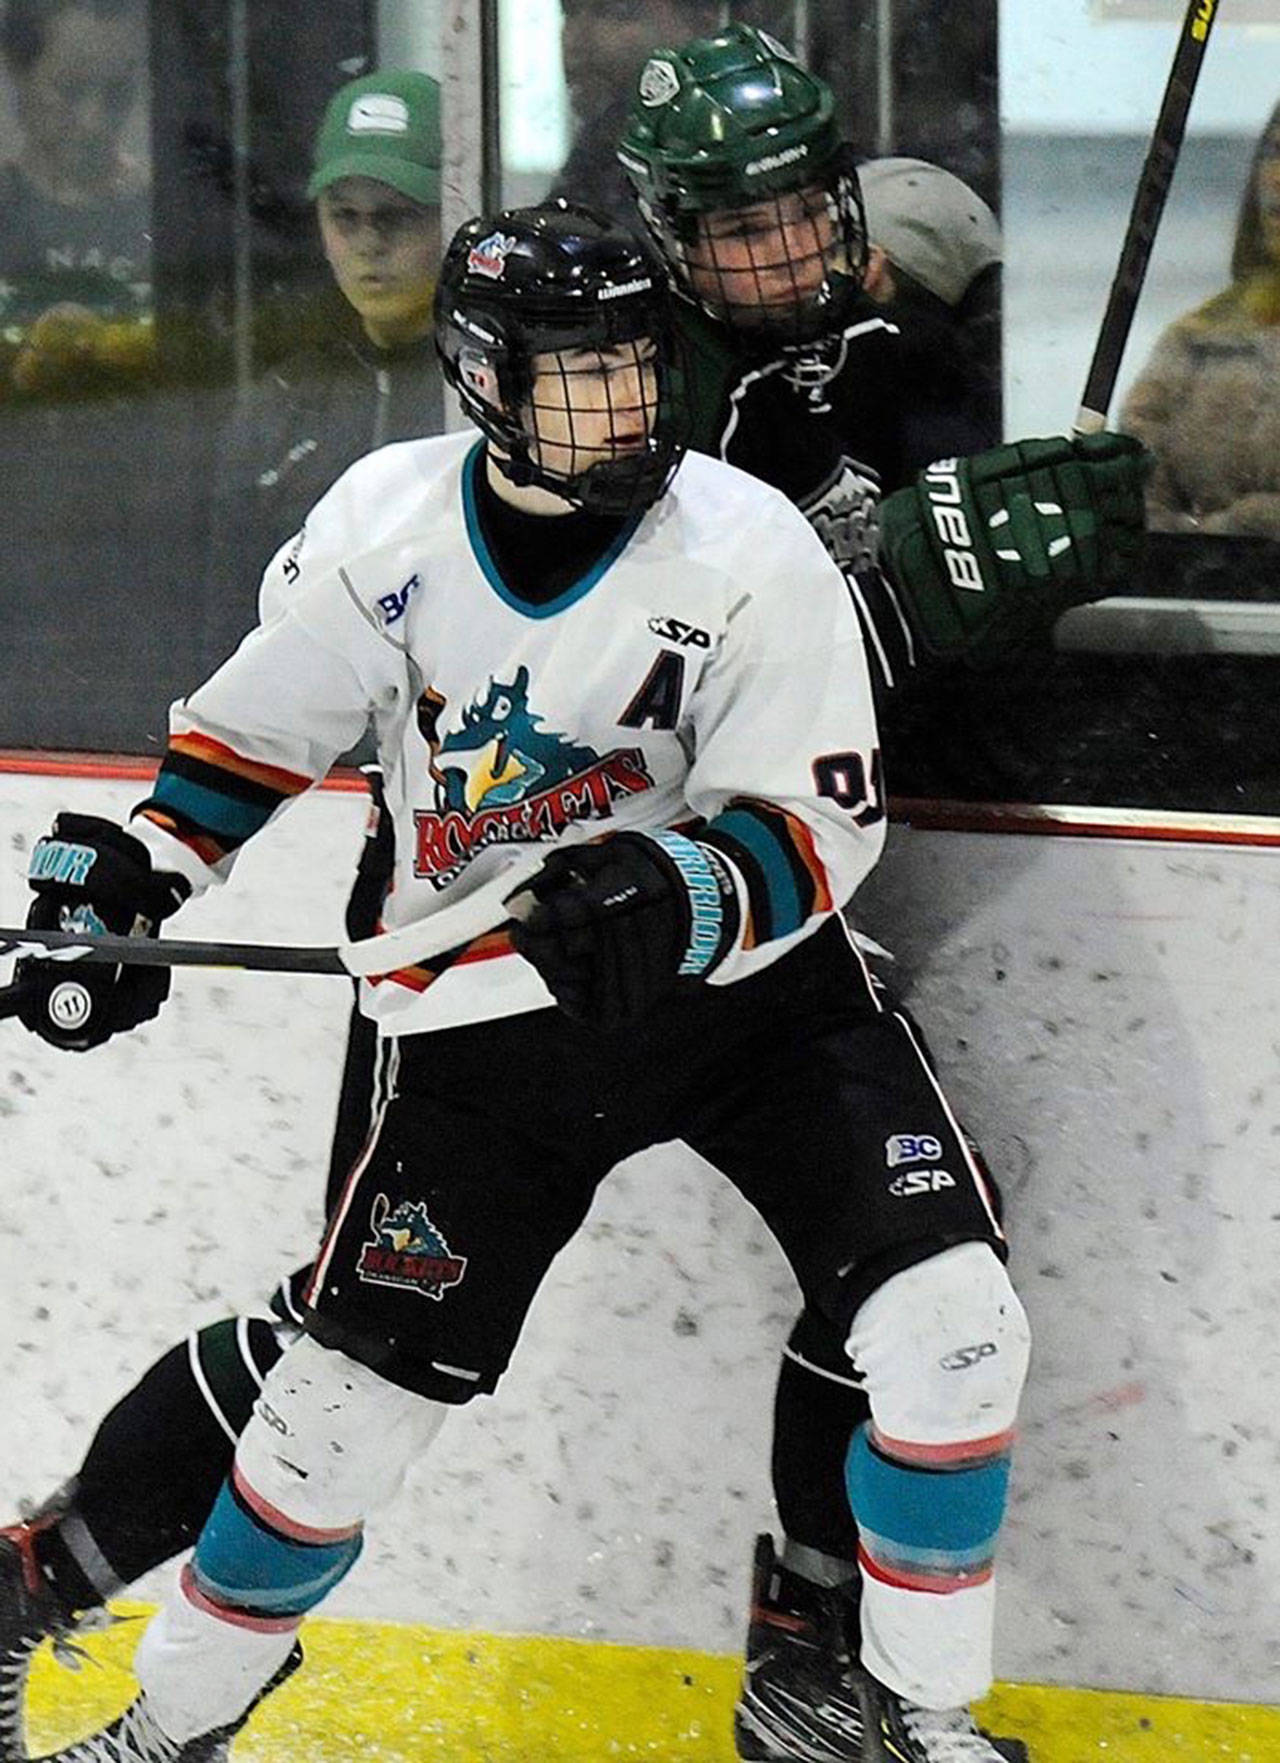 Max Graham signed with the Everett Silvertips on Wednesday. (Provided photo)